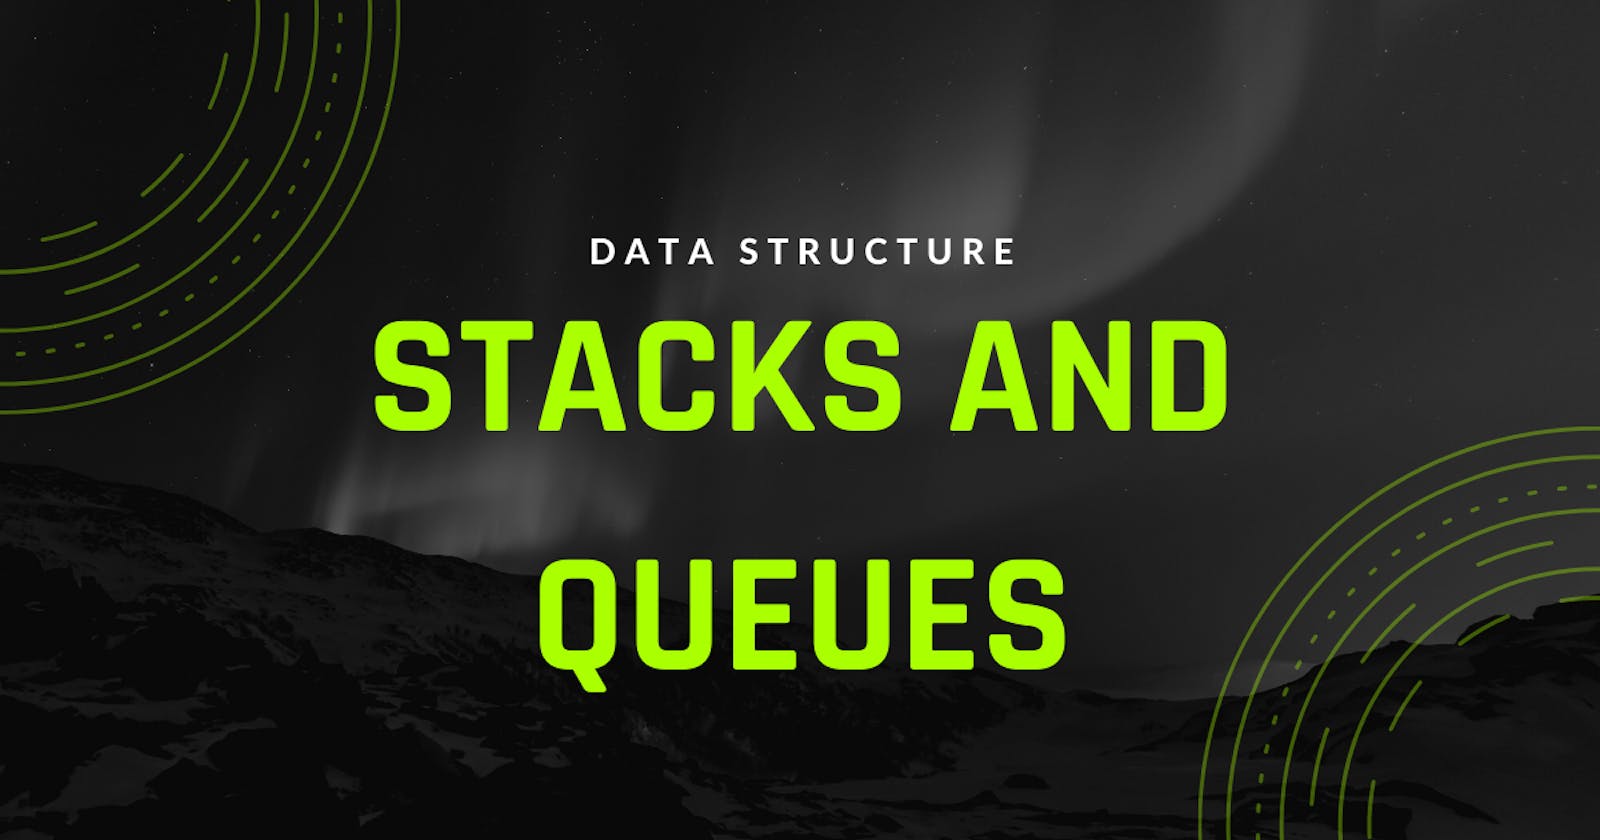 Data Structures: stacks and Queues